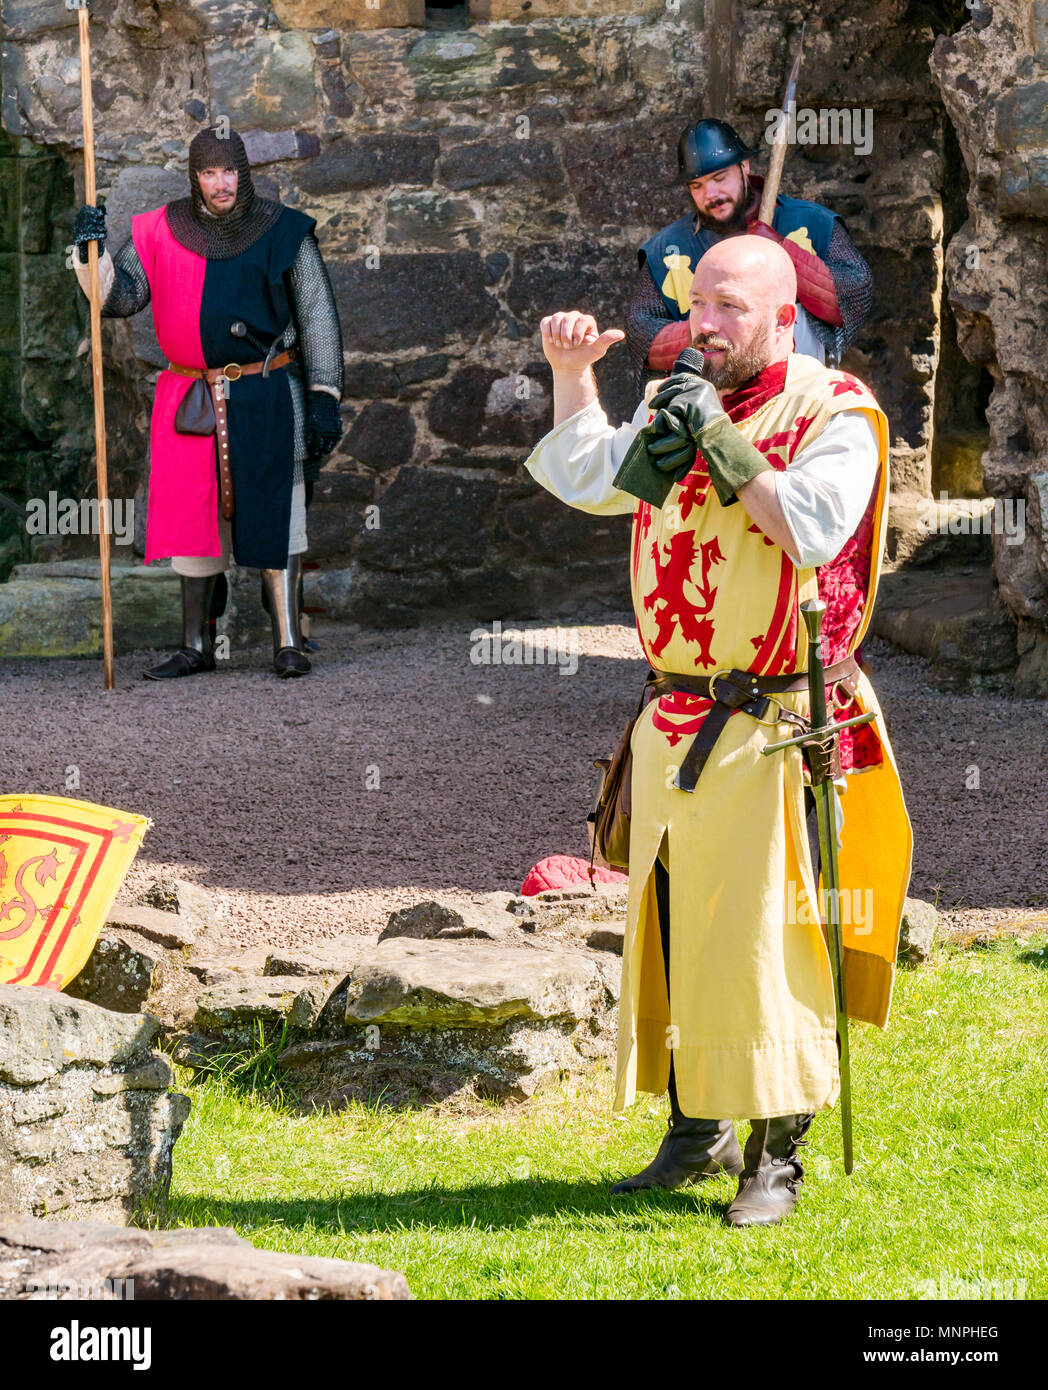 Dirleton, East Lothian, Scotland, UK, 19th May 2018.  Dirleton, East Lothian, Scotland, UK, 19th May 2018.  Dirleton Castle attack re-enactment. The Historic Saltire Society staging a tongue-in-cheek re-enactment of an attack by Robert the Bruce, King of Scotland, around 1311, to take the castle from the English, dressed in authentic clothes and armour and wielding replica weapons in Historic Environment Scotland's Dirleton Castle. A man playing Robert the Bruce dressed in costume with a lion rampant speaking to the crowd with a microphone. Soldiers with pikes are in the background Stock Photo